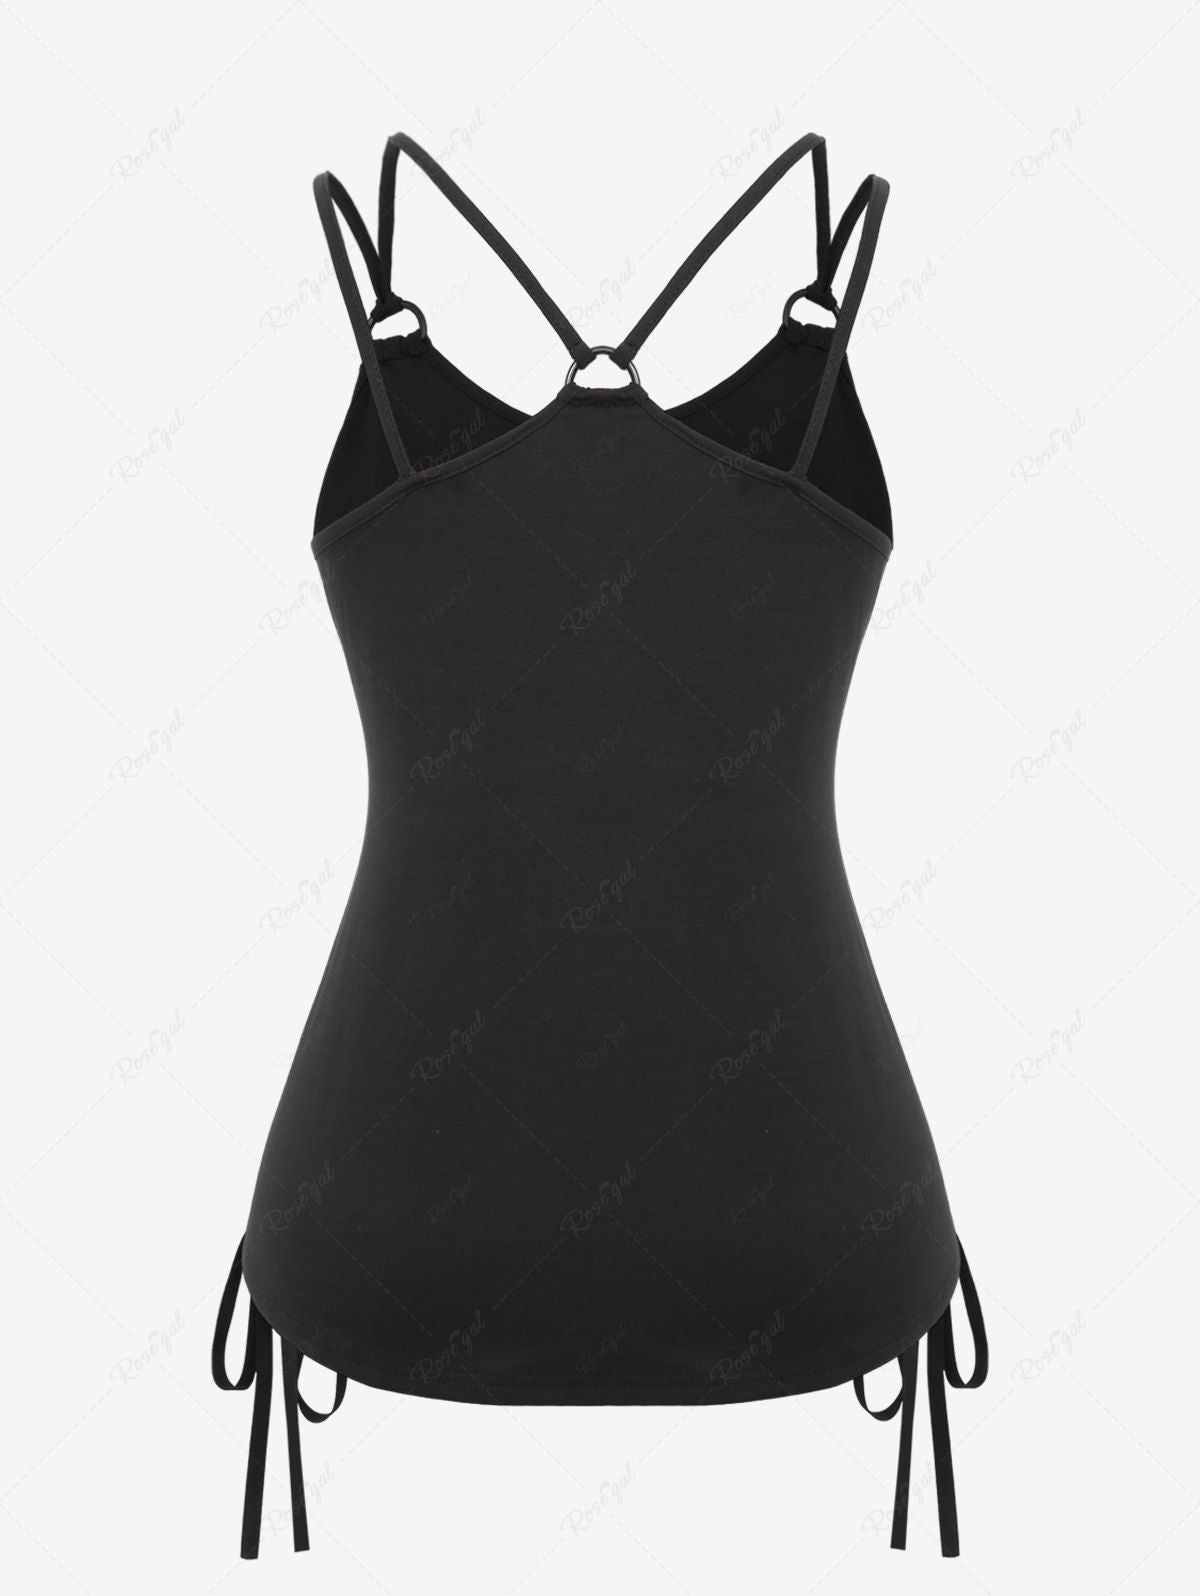 Gothic PU Lace Up Grommet Skull Zipper V Cut Solid Strappy Cami Top